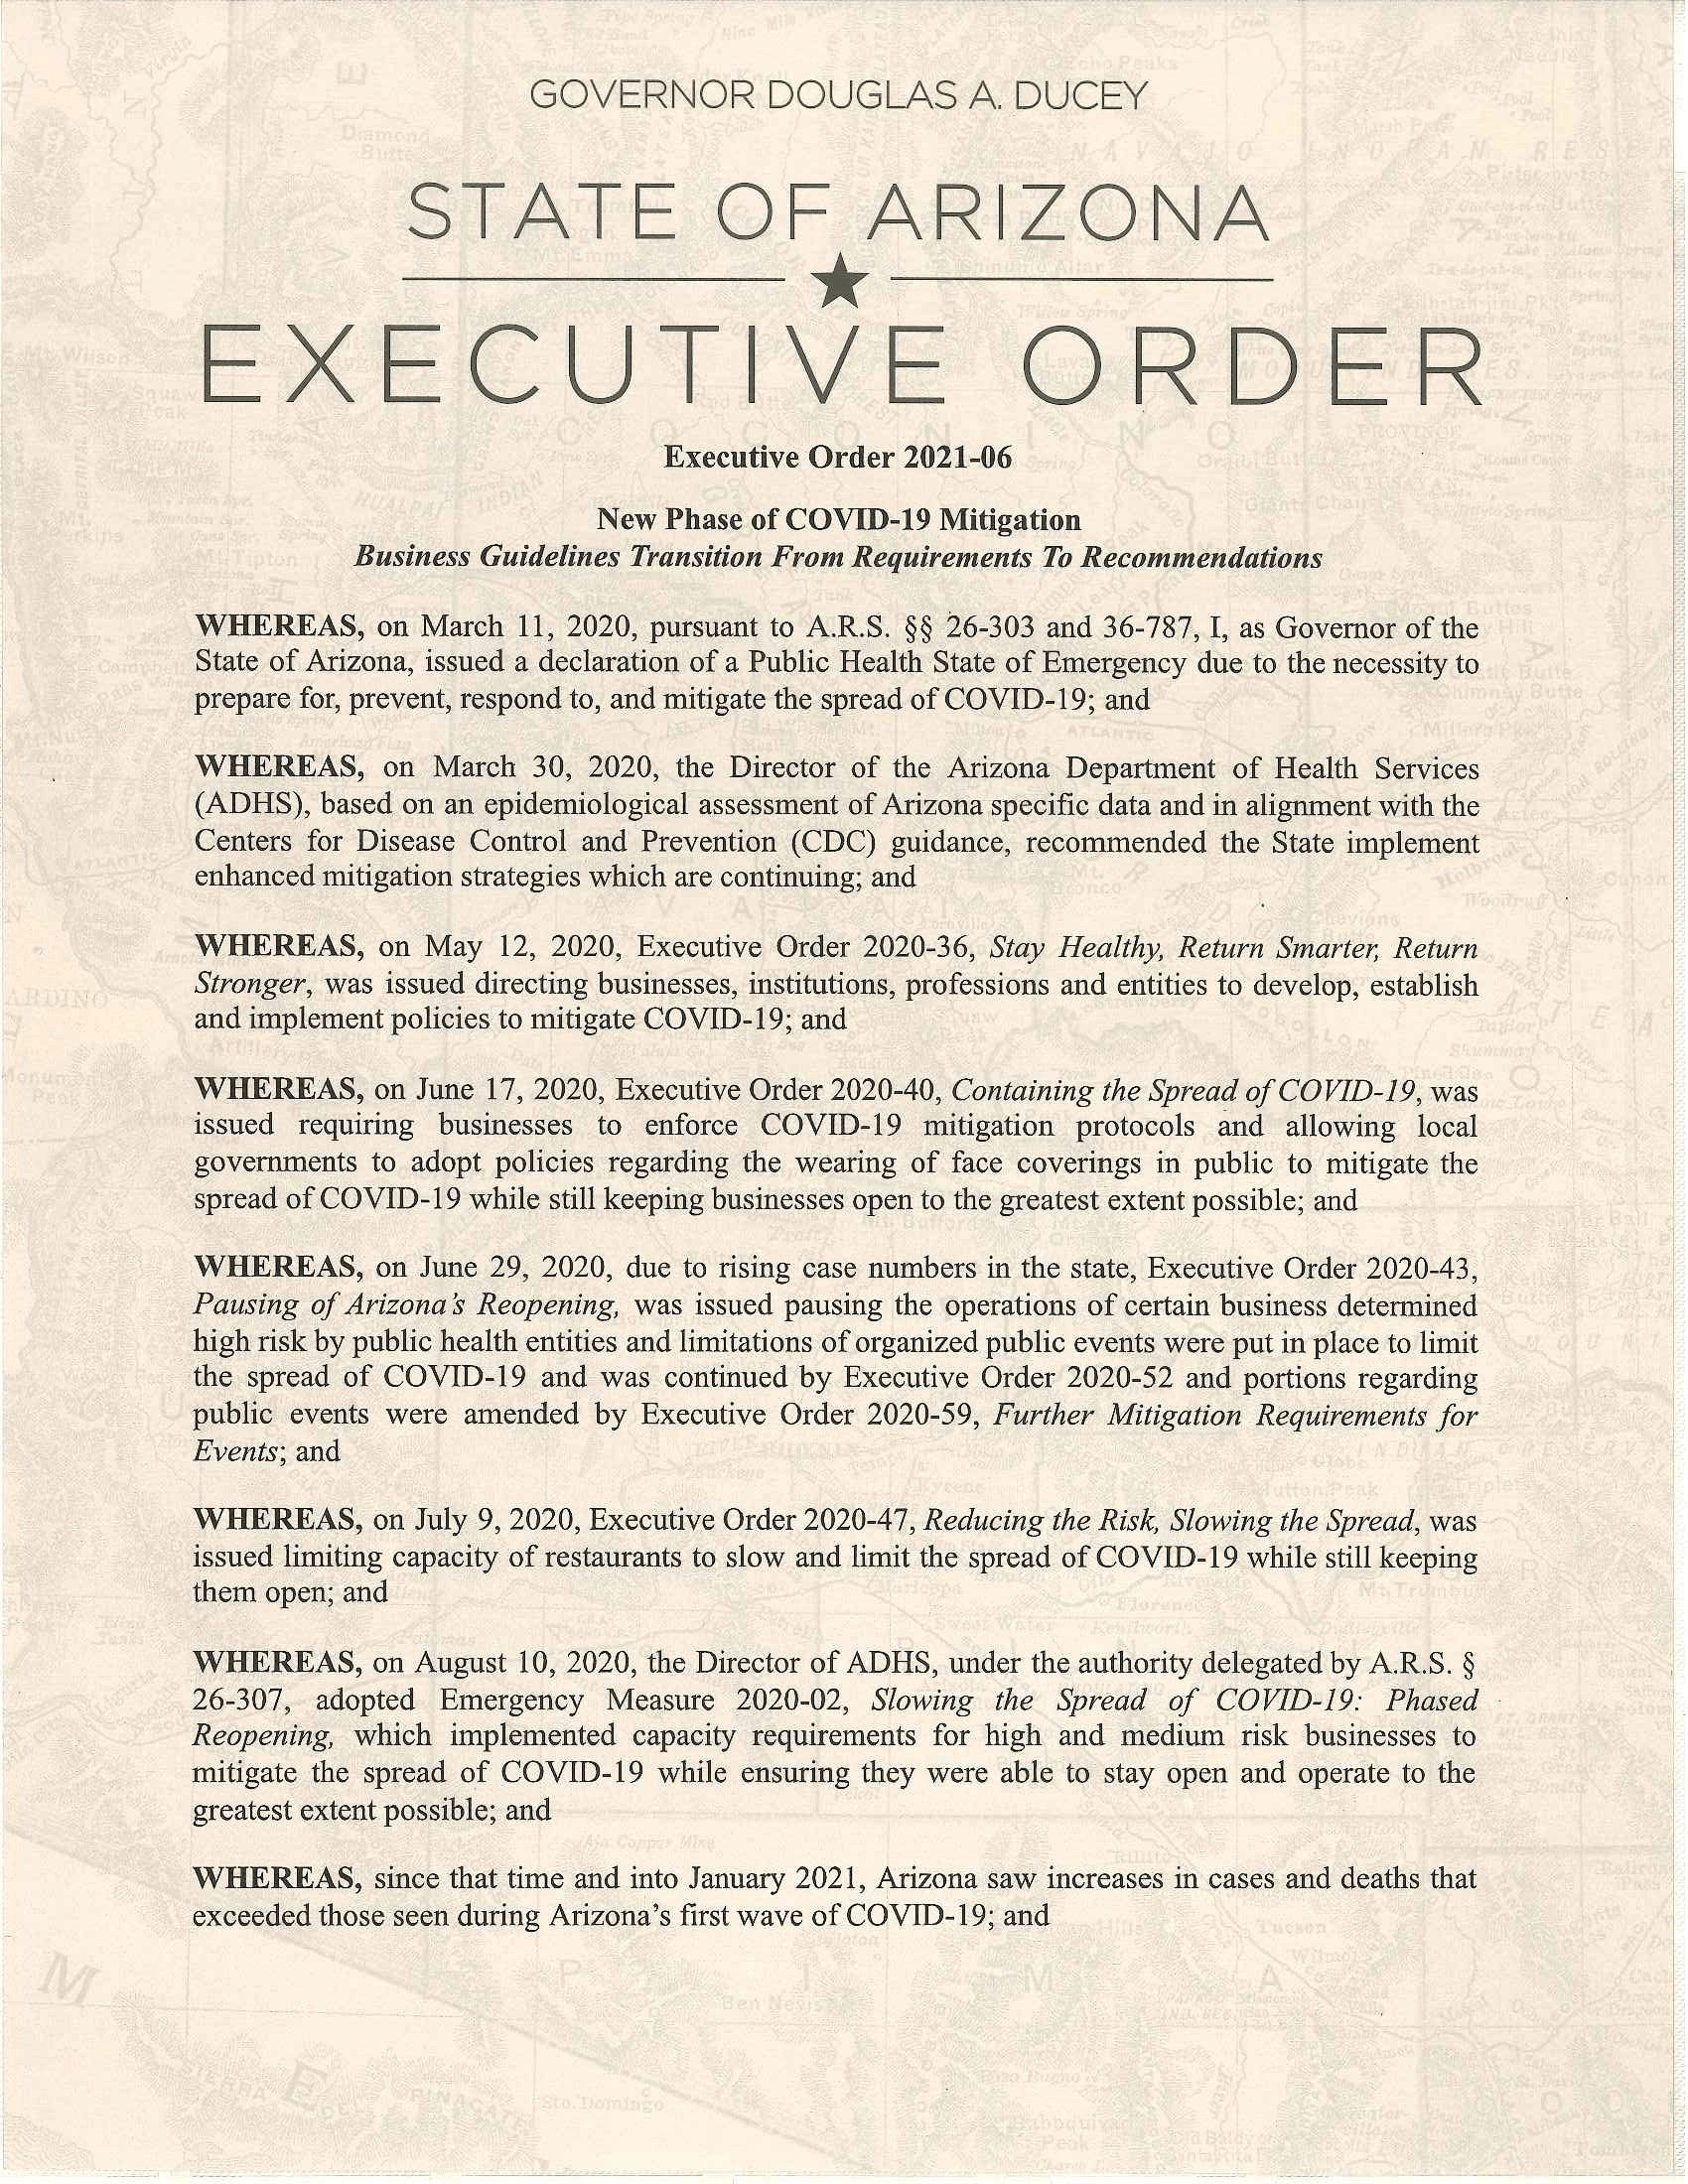 Page 1 of Doug Ducey's Executive Order 2021-06